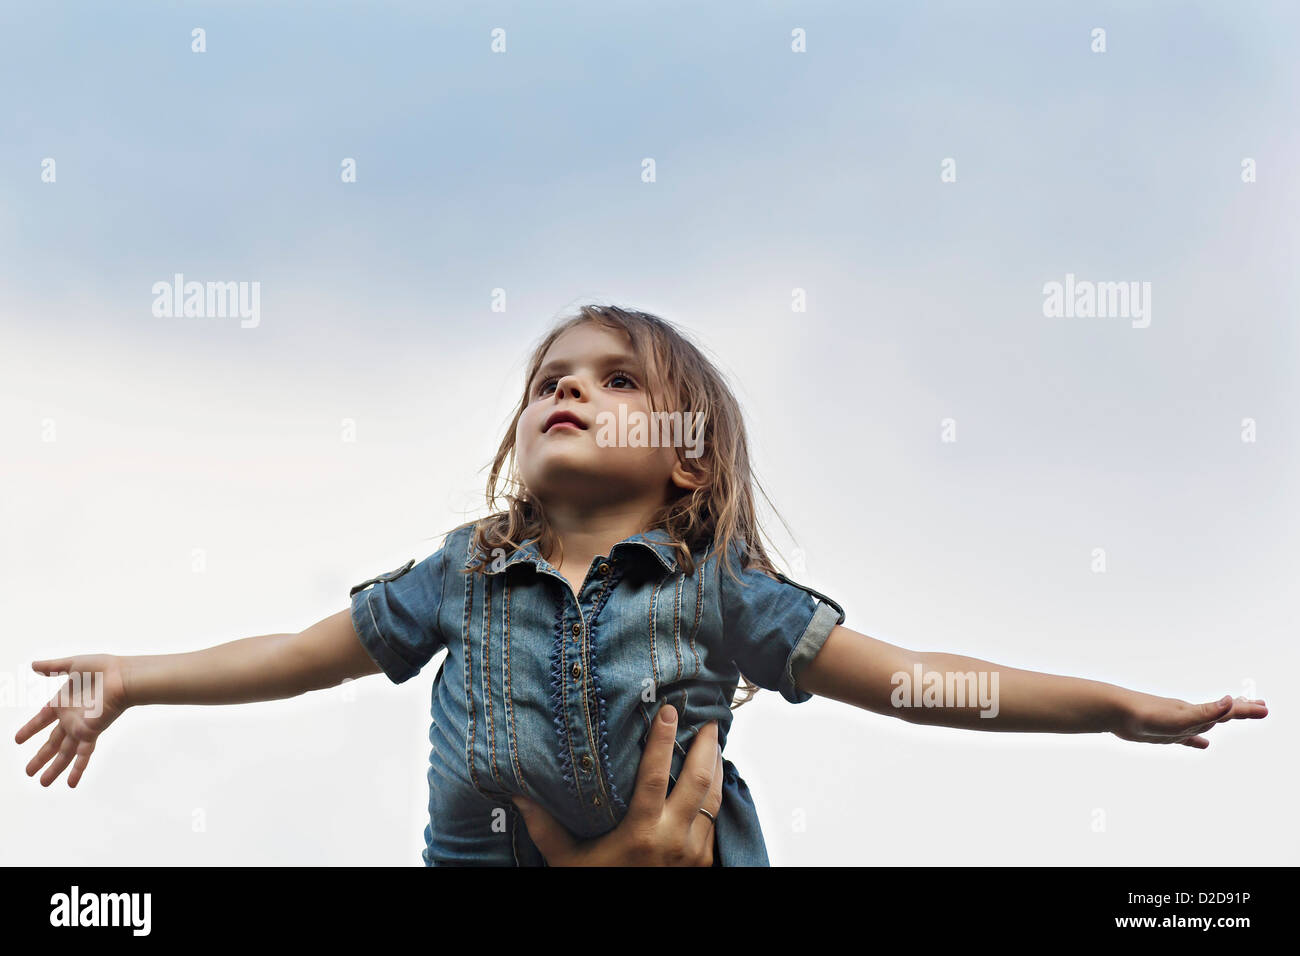 A hand holding up a young girl who is pretending to be an airplane Stock Photo